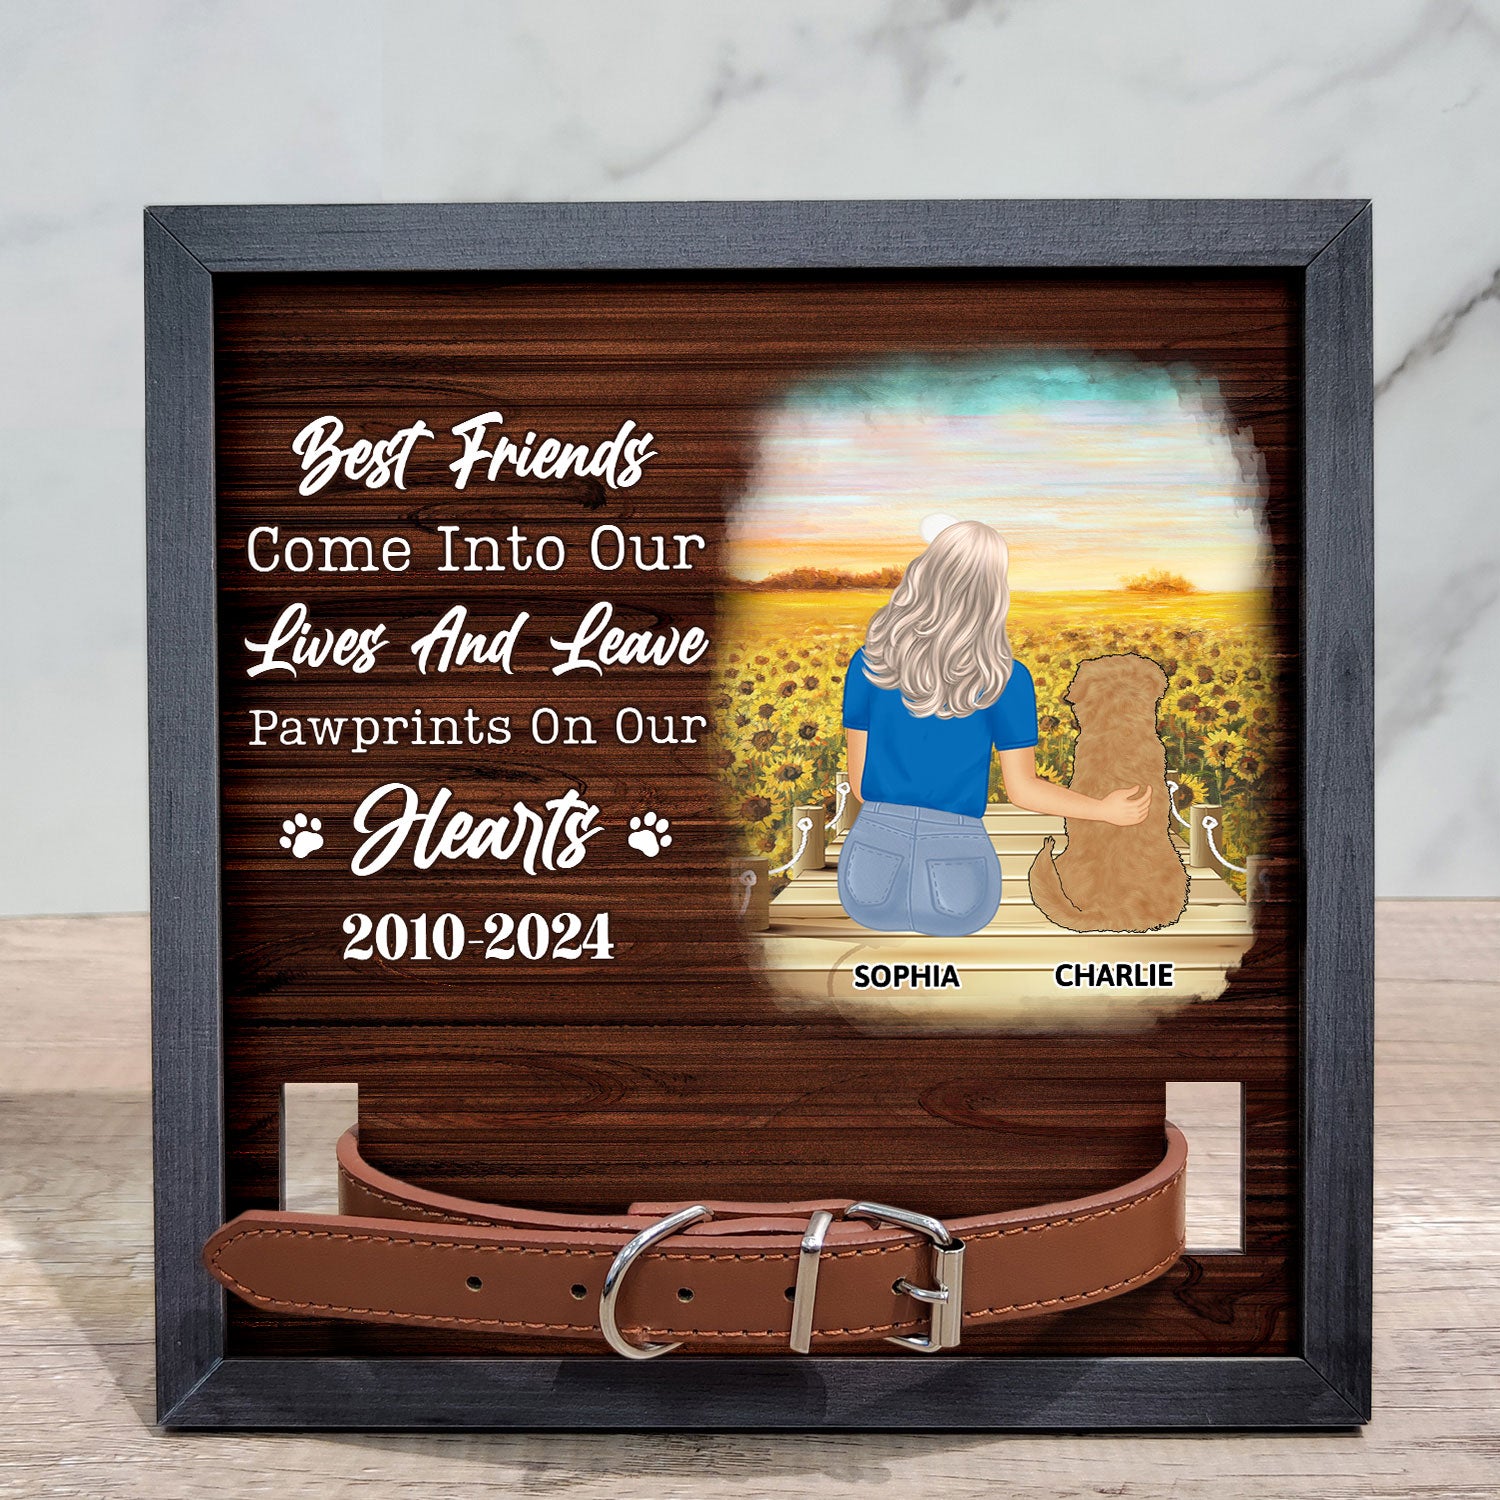 Best Friends Are Never Forgotten - Memorial, Sympathy Gift For Dog Owners, Dog Lovers - Personalized Pet Loss Sign, Collar Frame